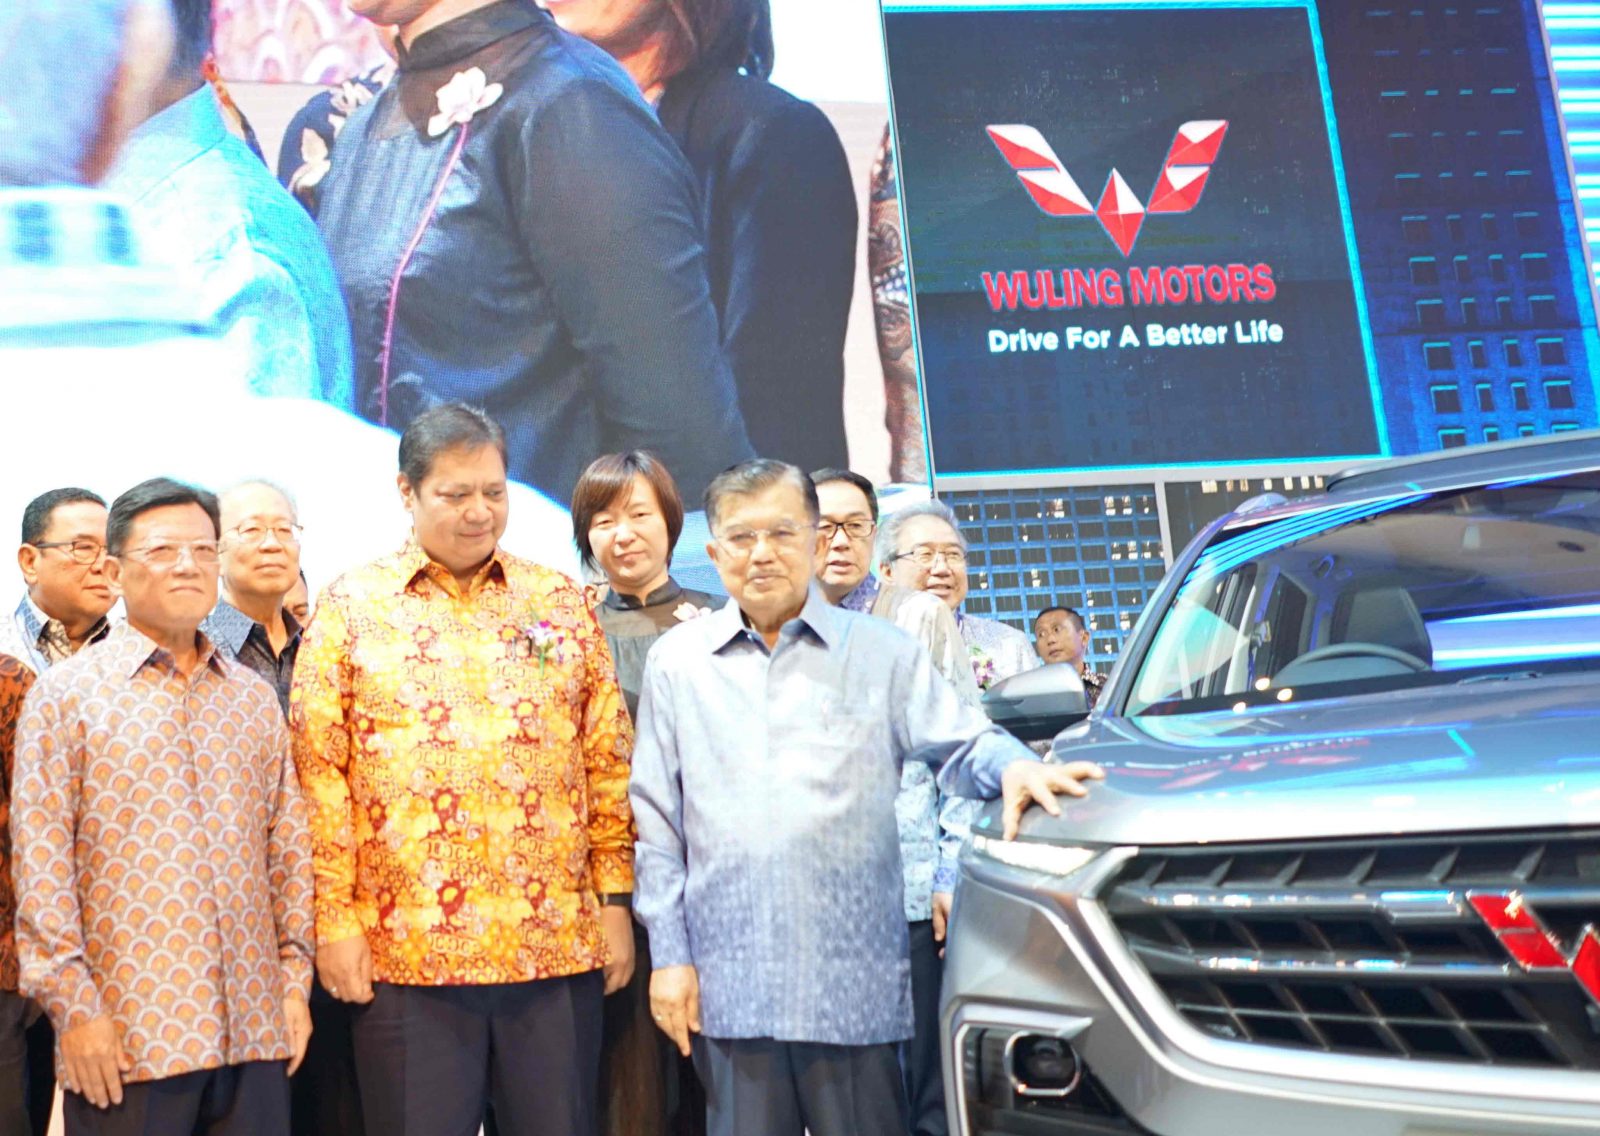 Image Wuling Carries the ‘World of Wuling’ Concept at GIIAS 2019